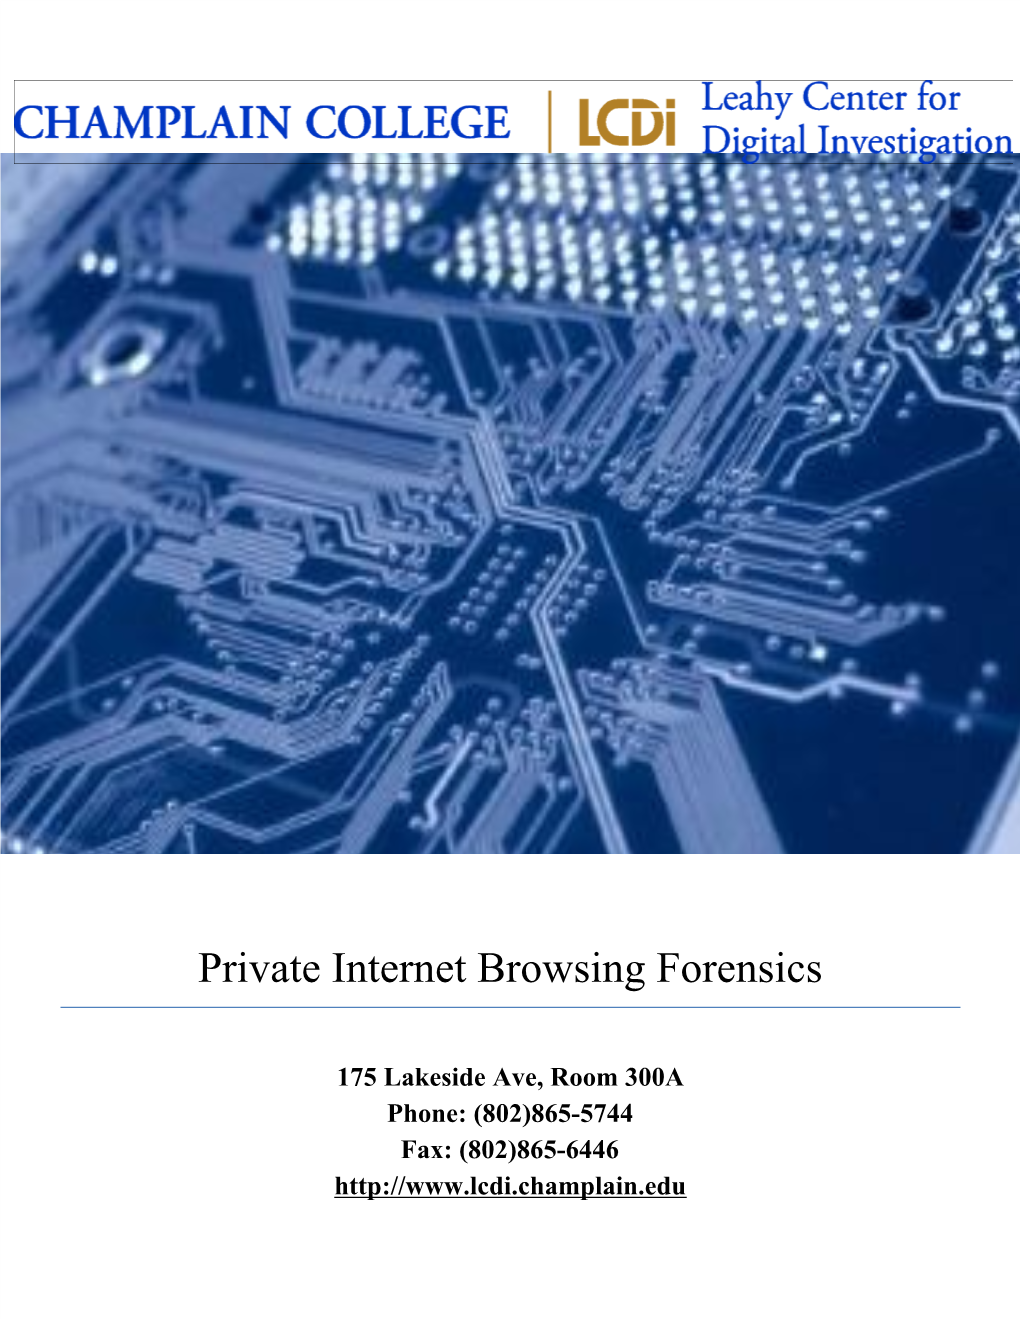 Private Internet Browsing Forensics